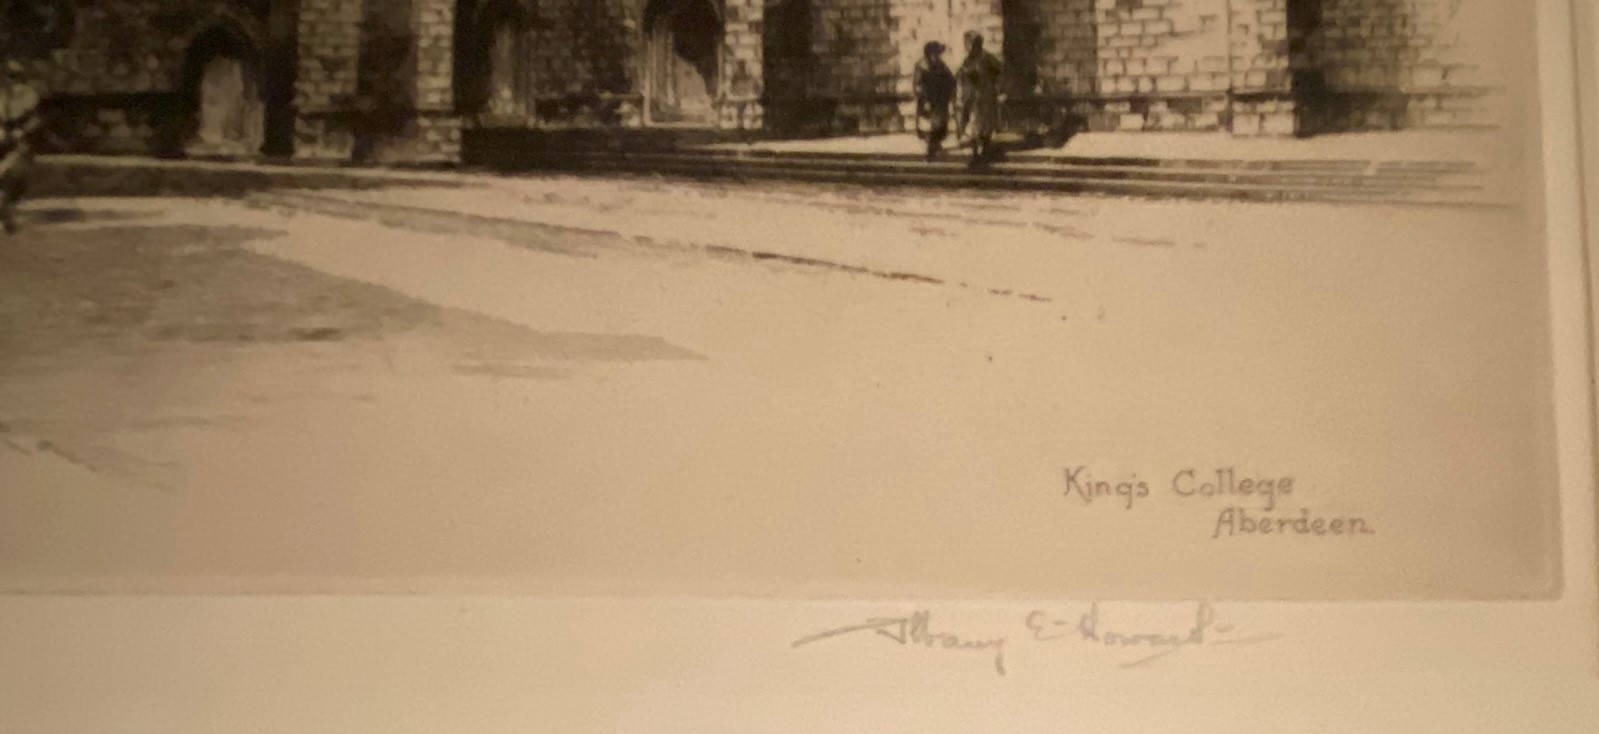 Albany E Howarth pencil signed and titled etching Kings college Aberdeen - Image 3 of 4